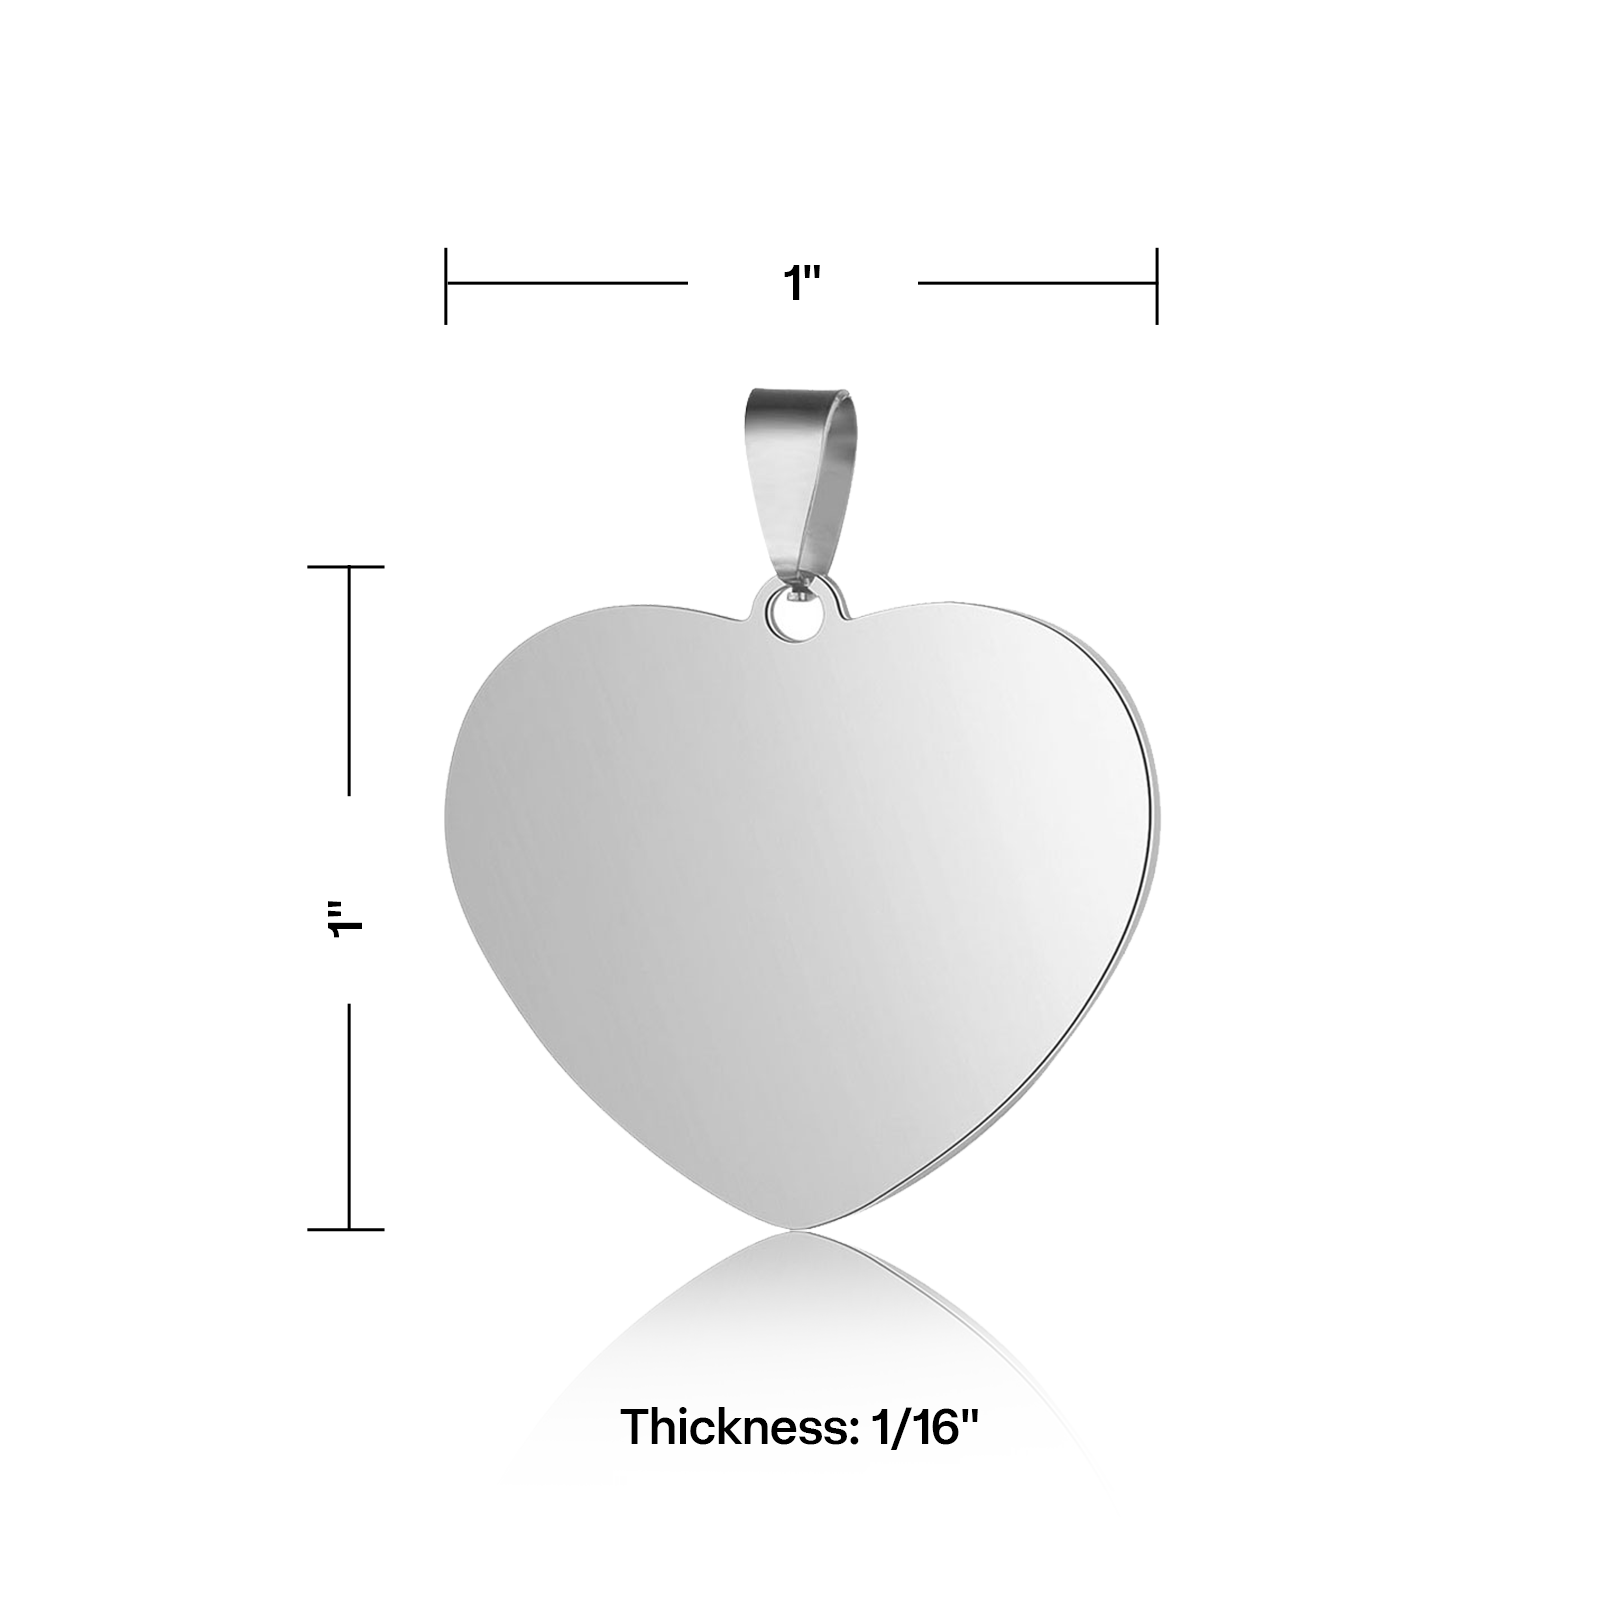 Heart Stainless Steel Tag for Laser Engraving (10pcs)